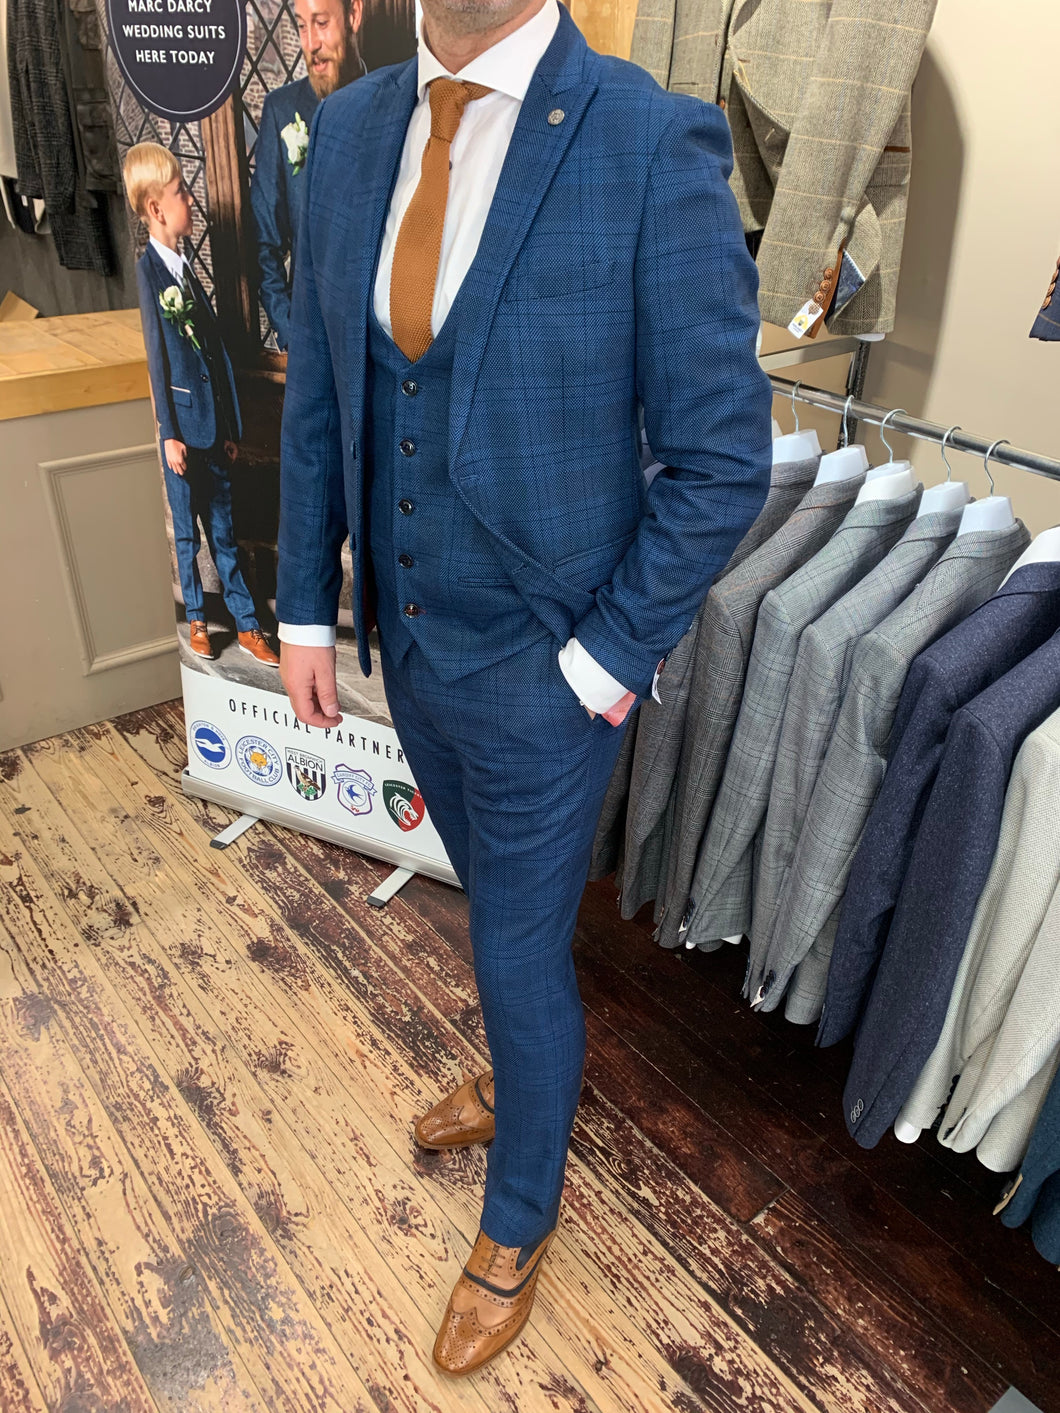 Marc Darcy ‘Jerry’ blue three piece suit (waistcoat, jacket and trousers sold separately) from Gere Menswear